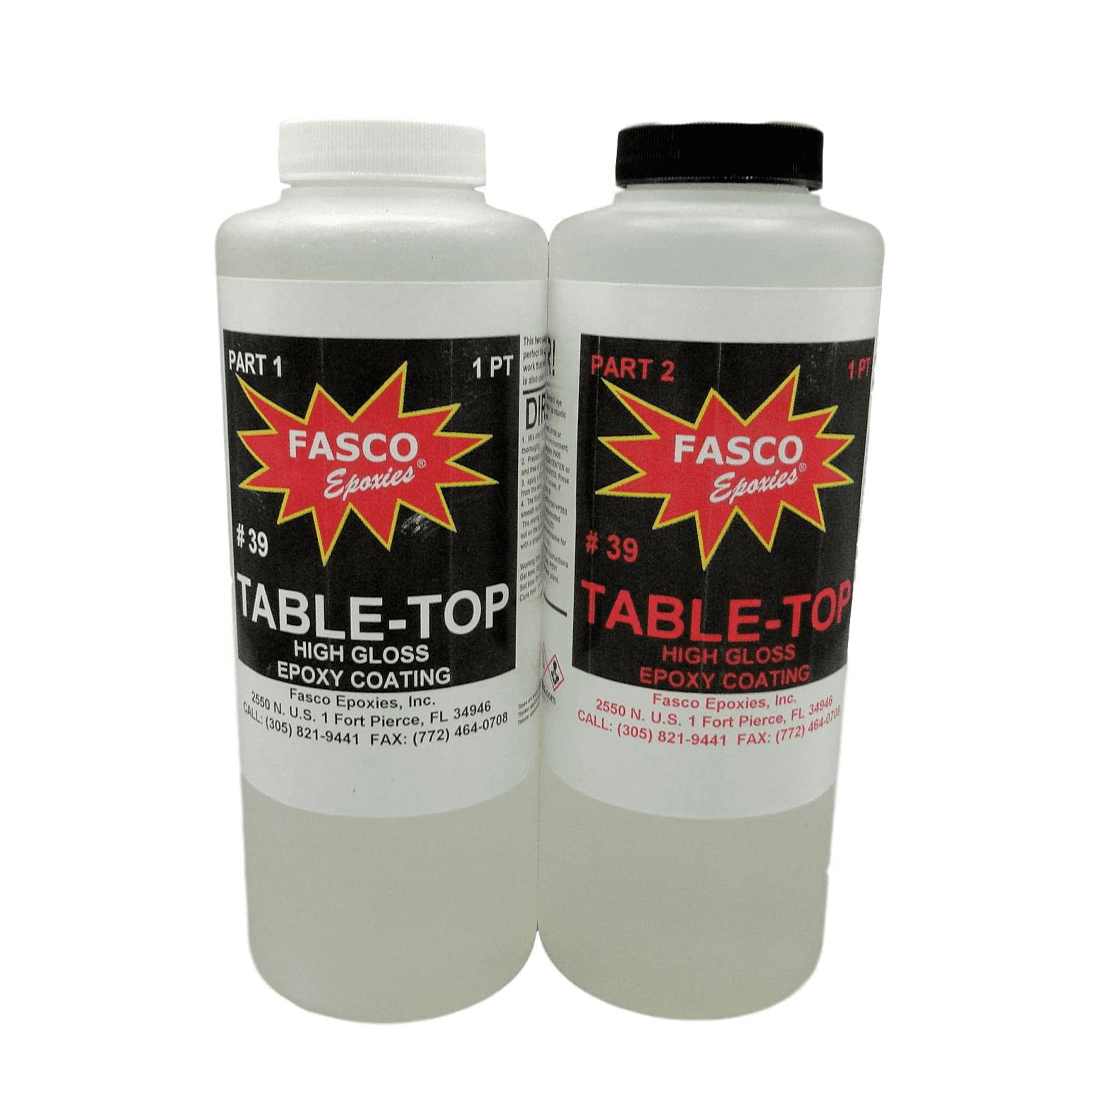 Stone Coat Countertops (4 Gallon) Epoxy Resin Kit for DIY Projects,  Kitchens, Bathrooms, Counters, Tables, Wood Slabs, and More! Heat Resistant  and Clear Epoxy Resin! 